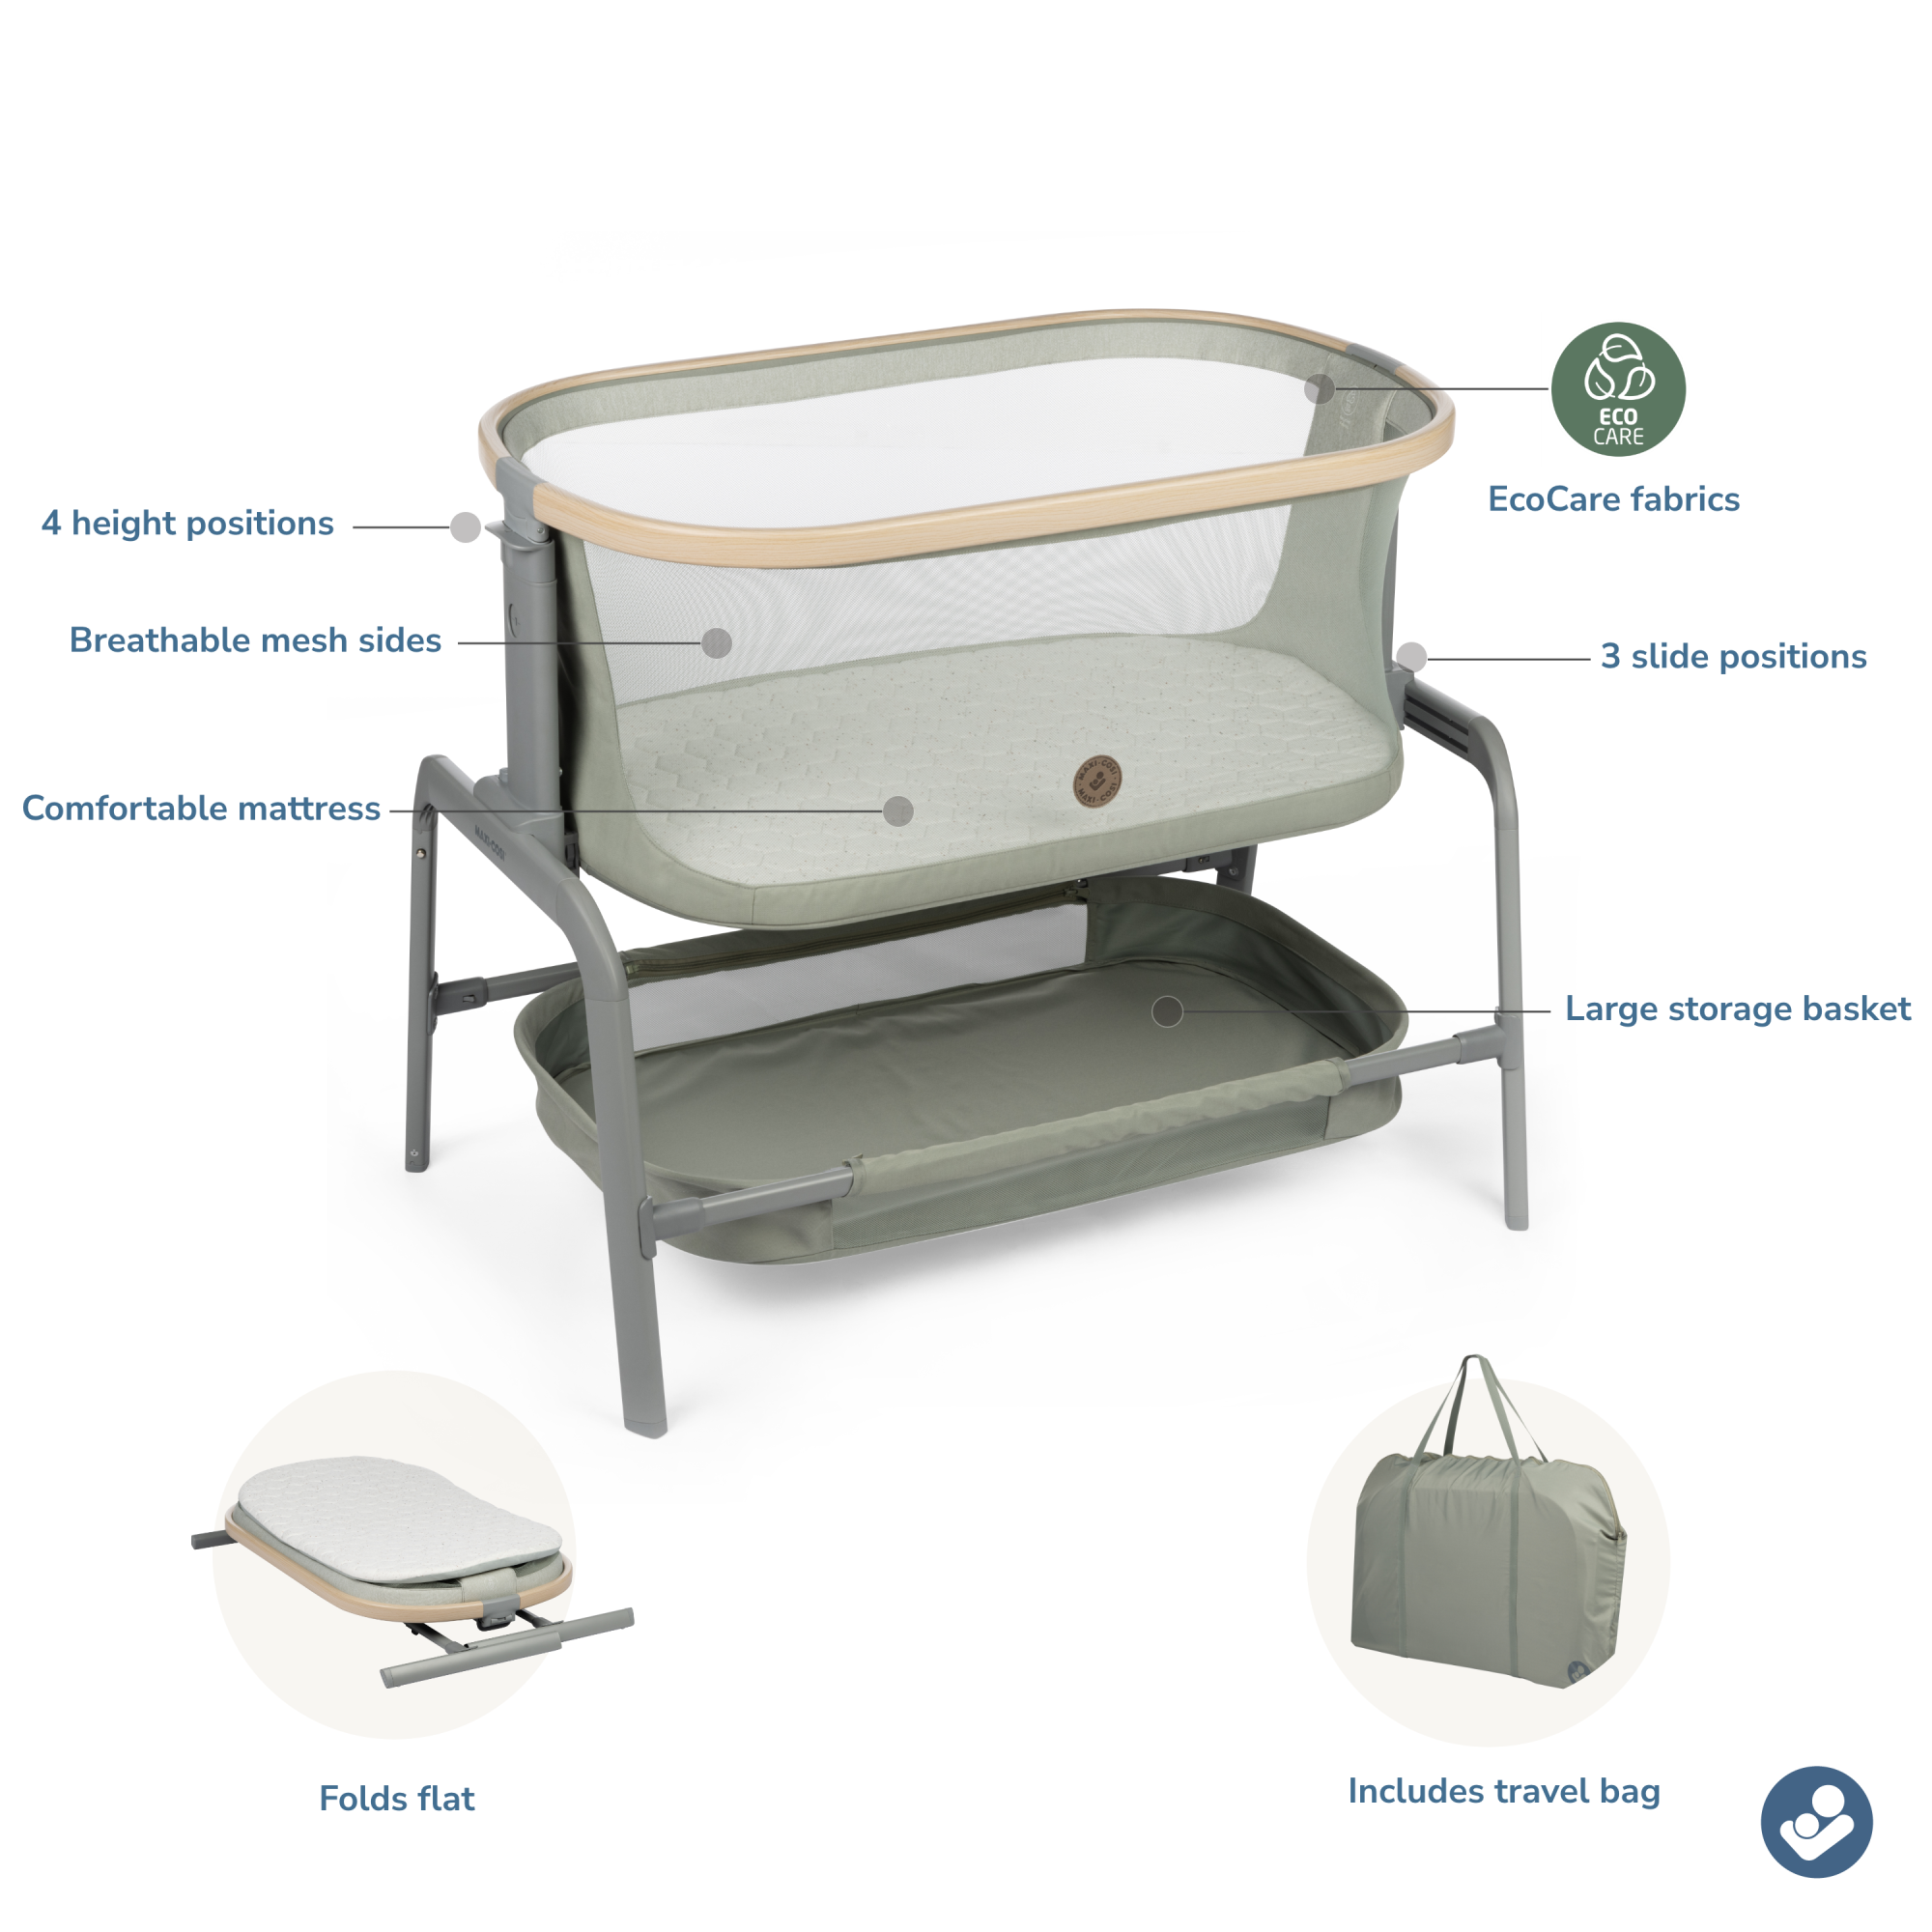 Iora Bedside Bassinet - Classic Green infographic: 4 height positions, breathable mesh sides, comfortable mattress, EcoCare fabrics, 3 slide positions, large storage basket, folds flat, includes travel bag